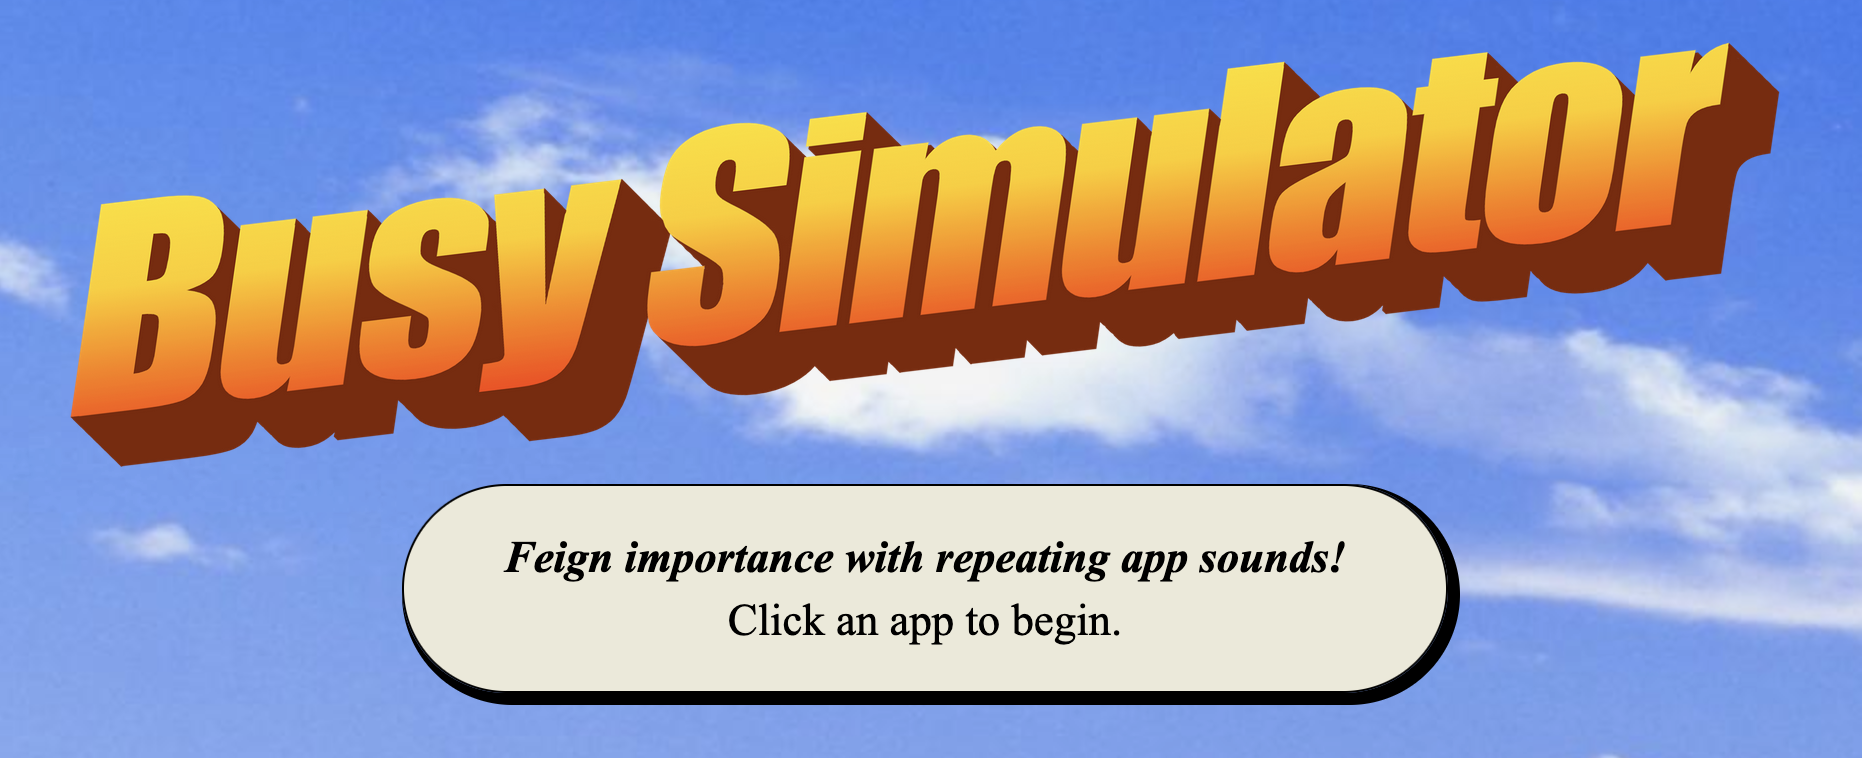 Busy simulator – Feign importance with repeating app sounds!